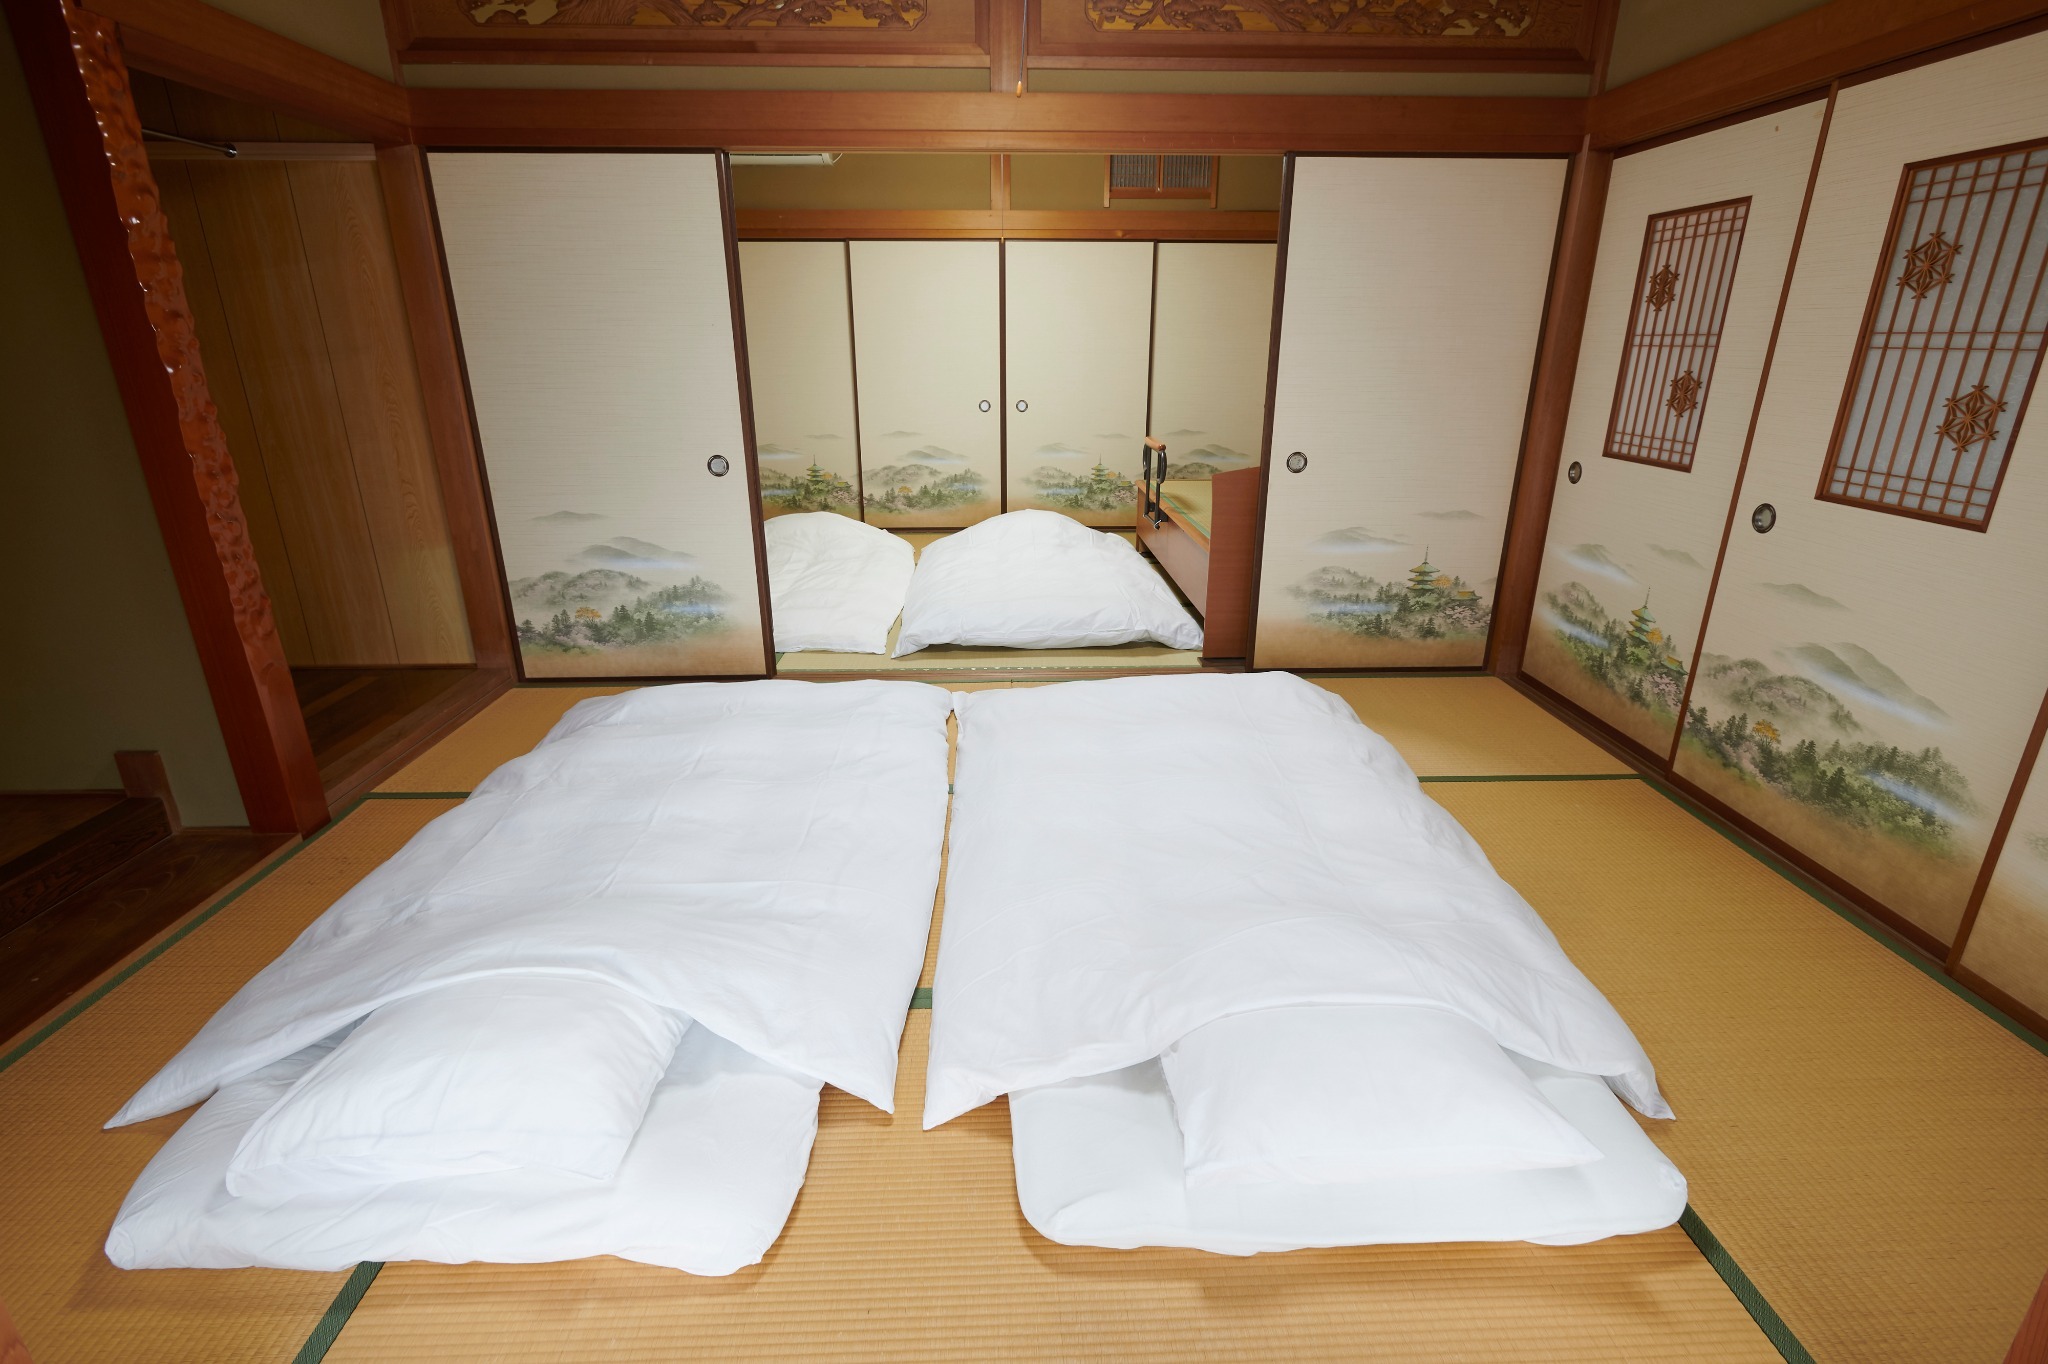 6 people can sleep in the Japanese room. In case of 7 or 8 people, please use the living room. 和室に6名様までお休みになれます。7人以上になる場合にはリビングスペースをご利用ください。